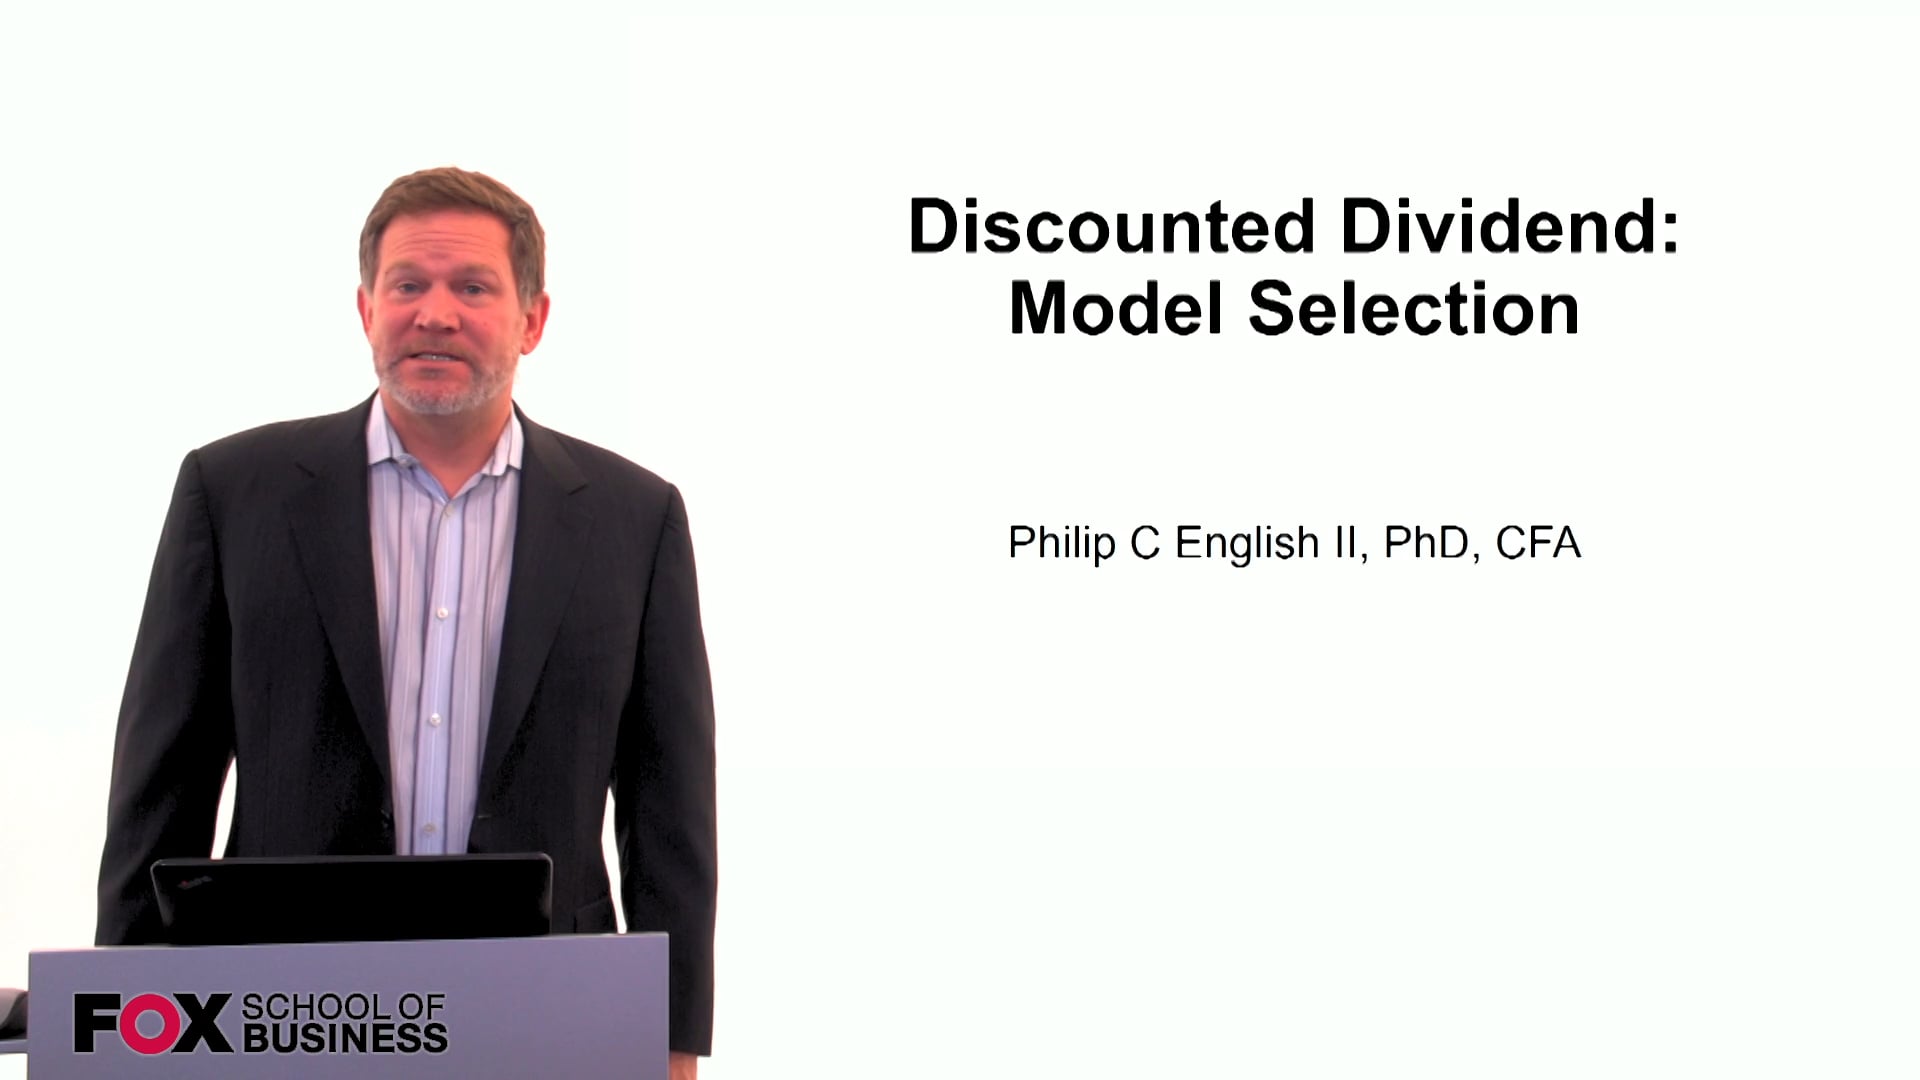 Discounted Dividend: Model Selection